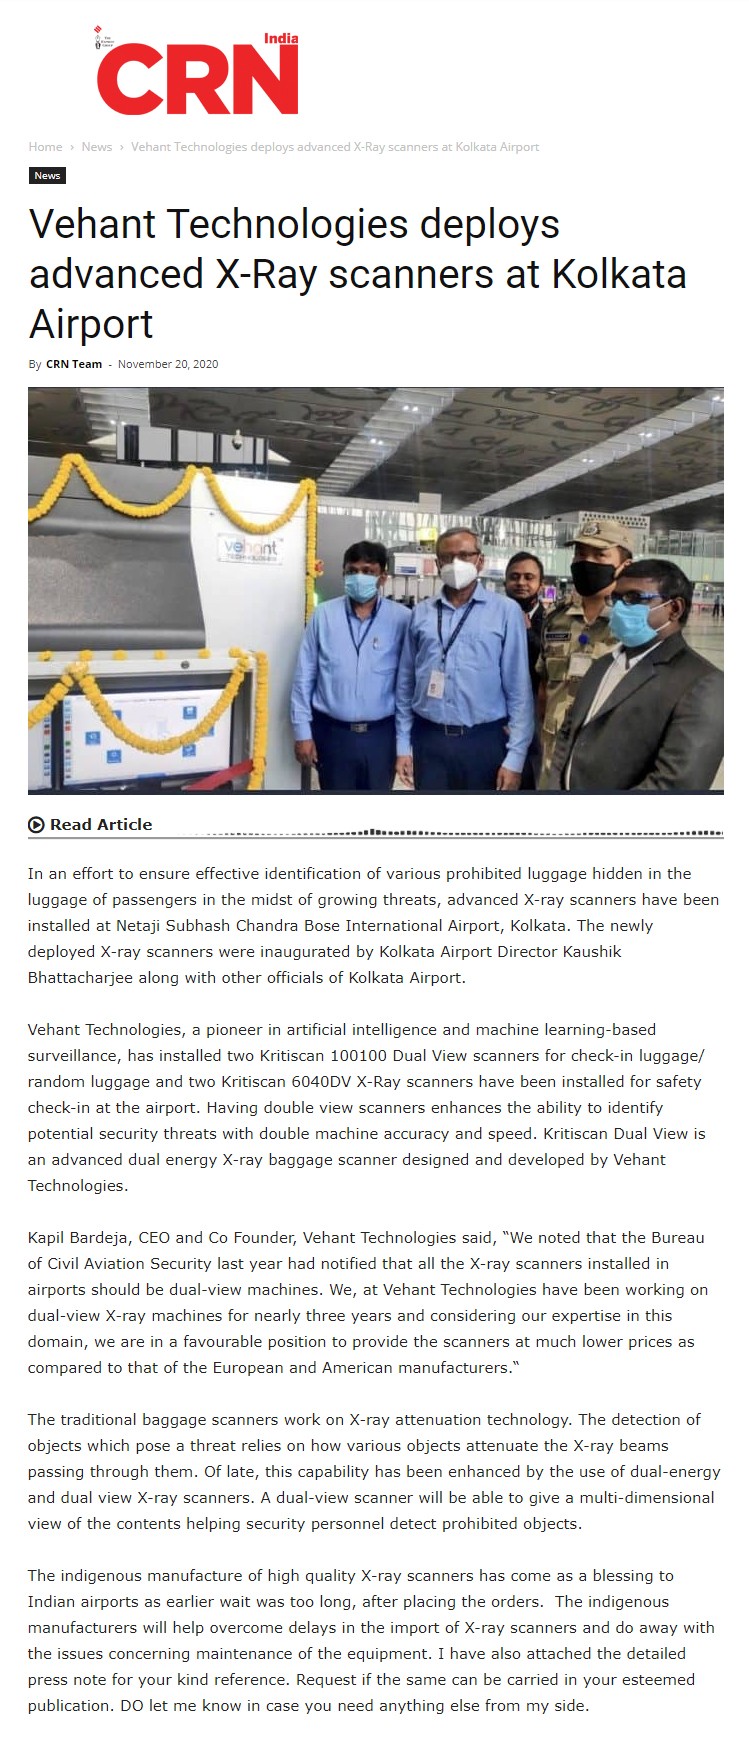 CRN News covers inauguration of dual view x-ray baggage scanners at Kolkata Airport on Novermber 20, 2020